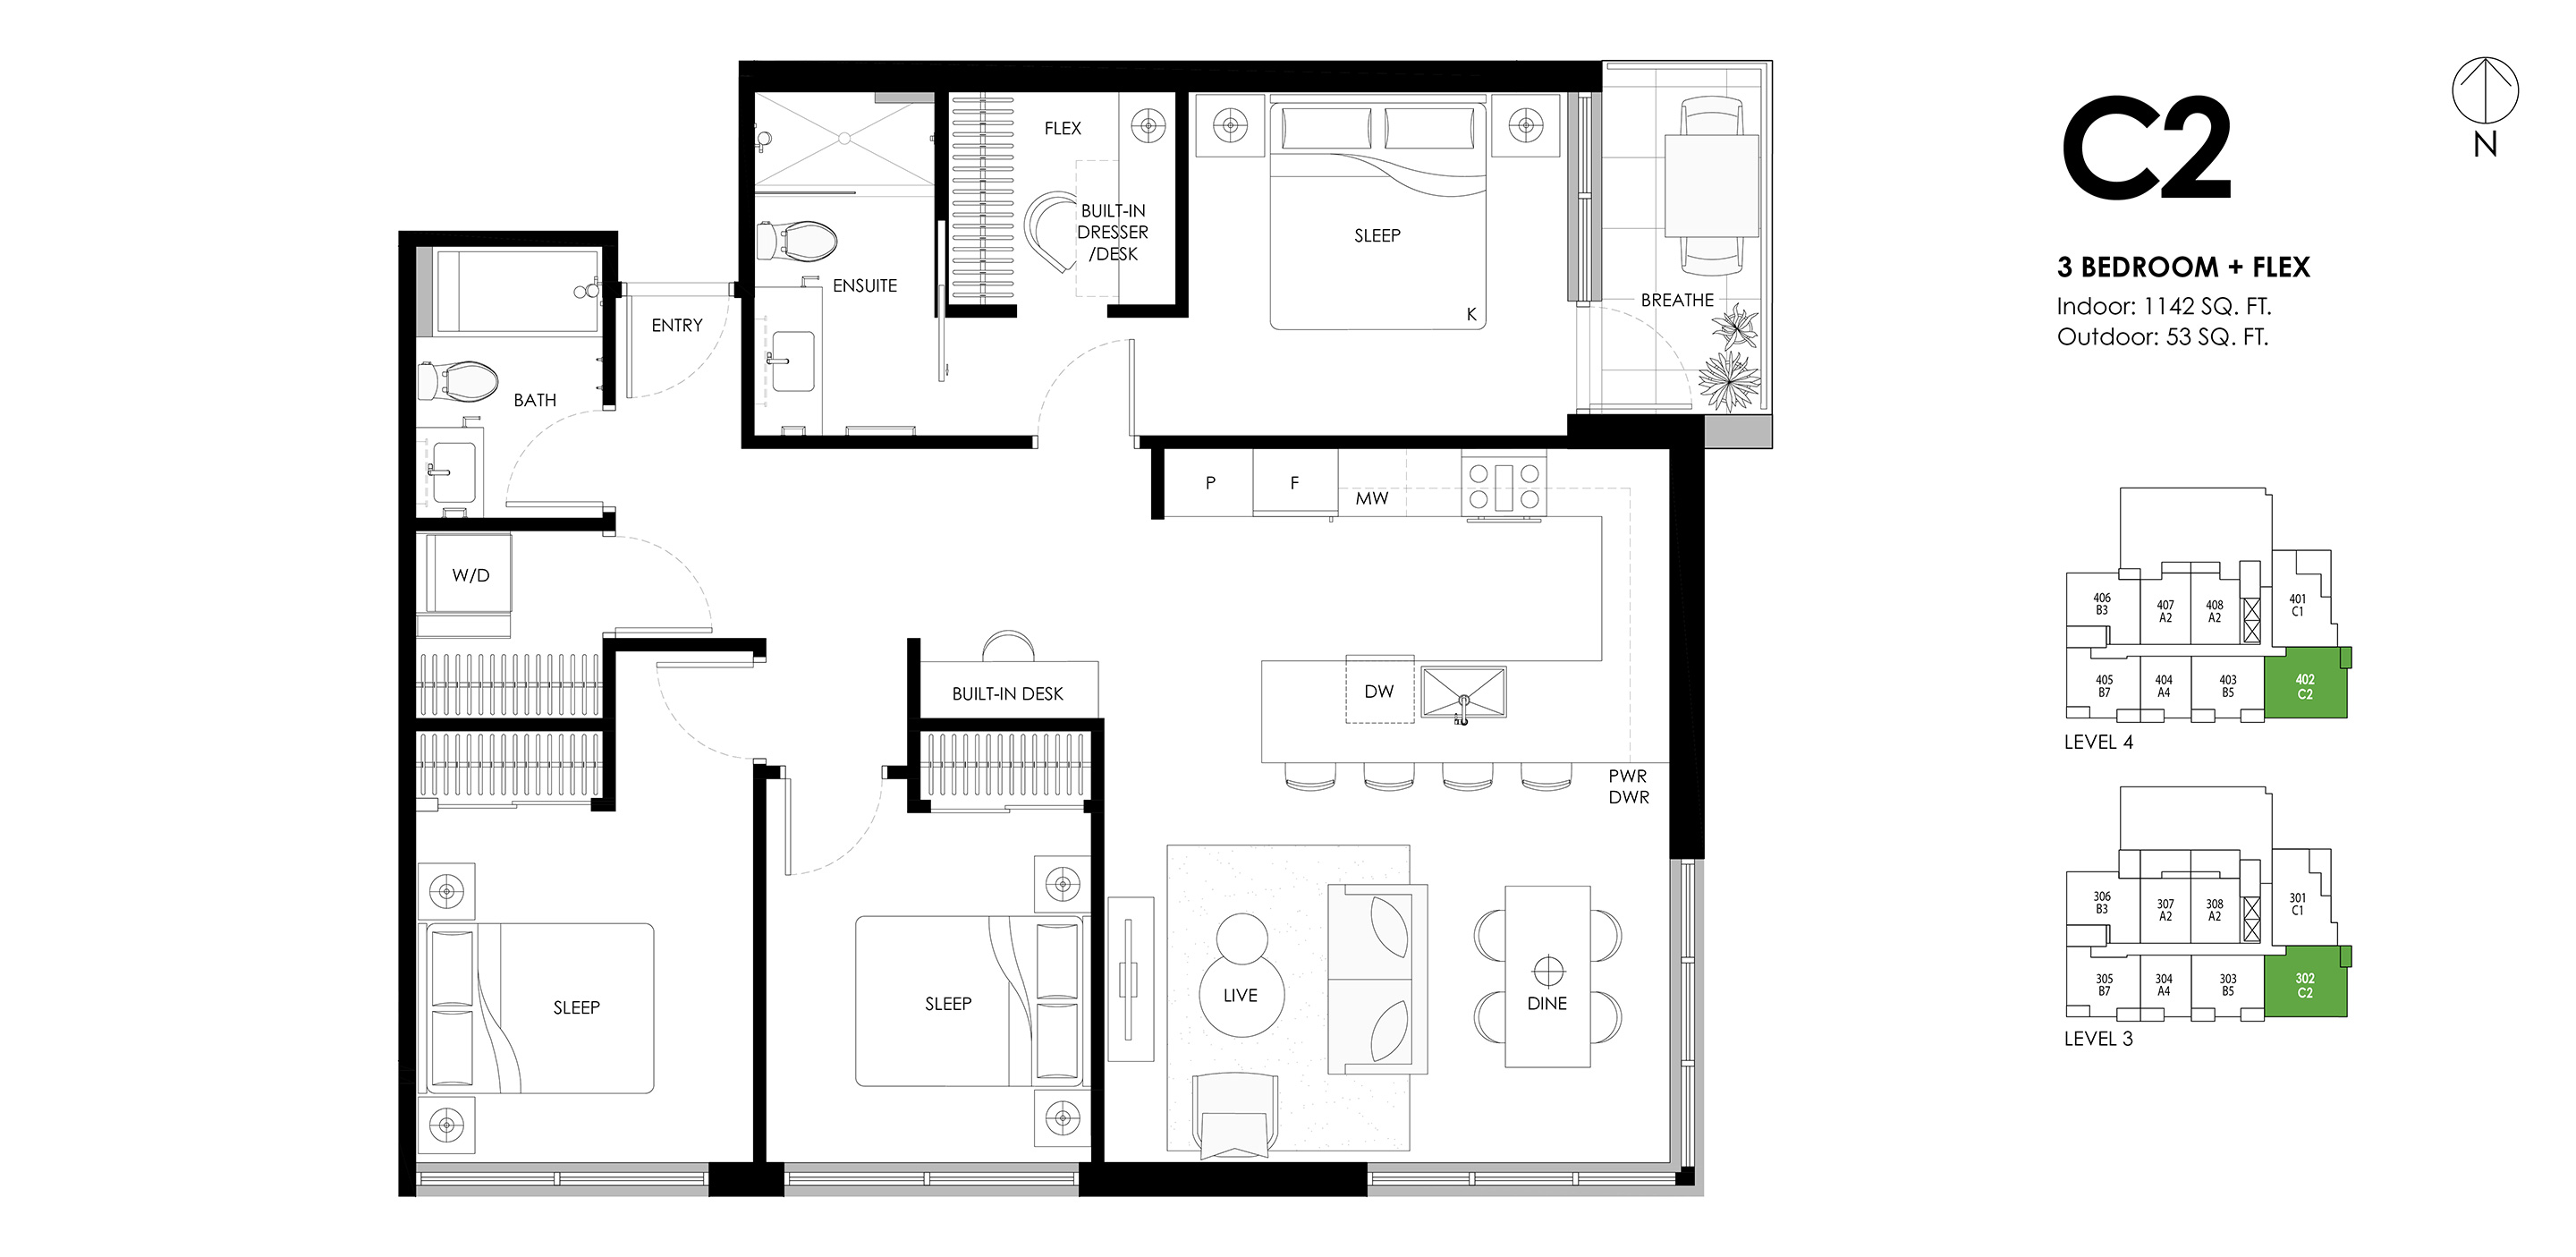 C2 Floor Plan of Ava Condos with undefined beds